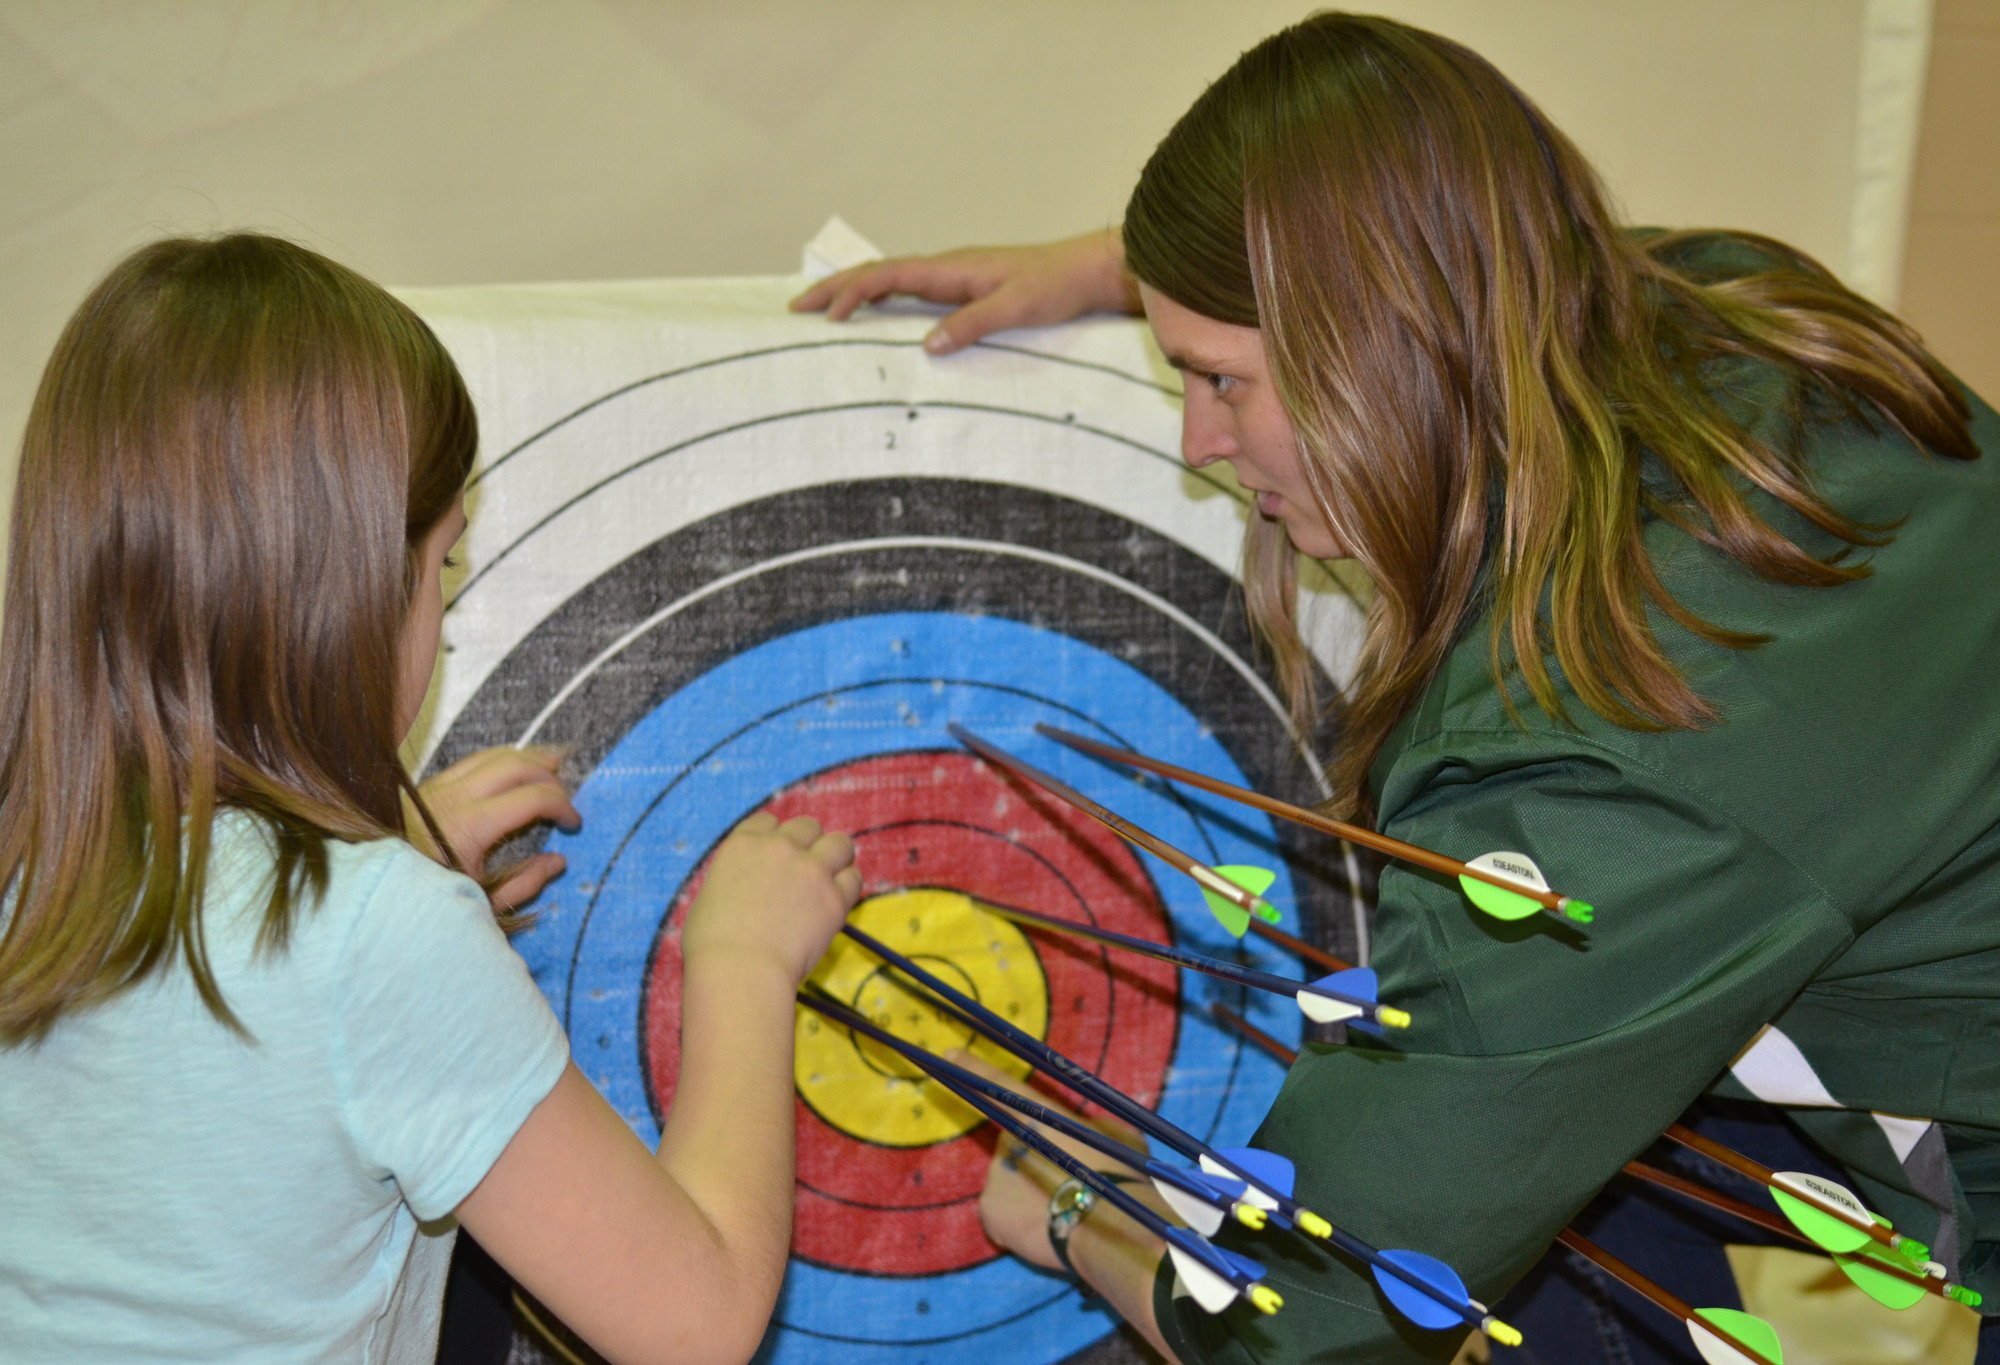 Northern Michigan University senior Casey DeVooght talks with archer Kaylee Helman as they pull their arrows at the Cherry Creek Elementary School.